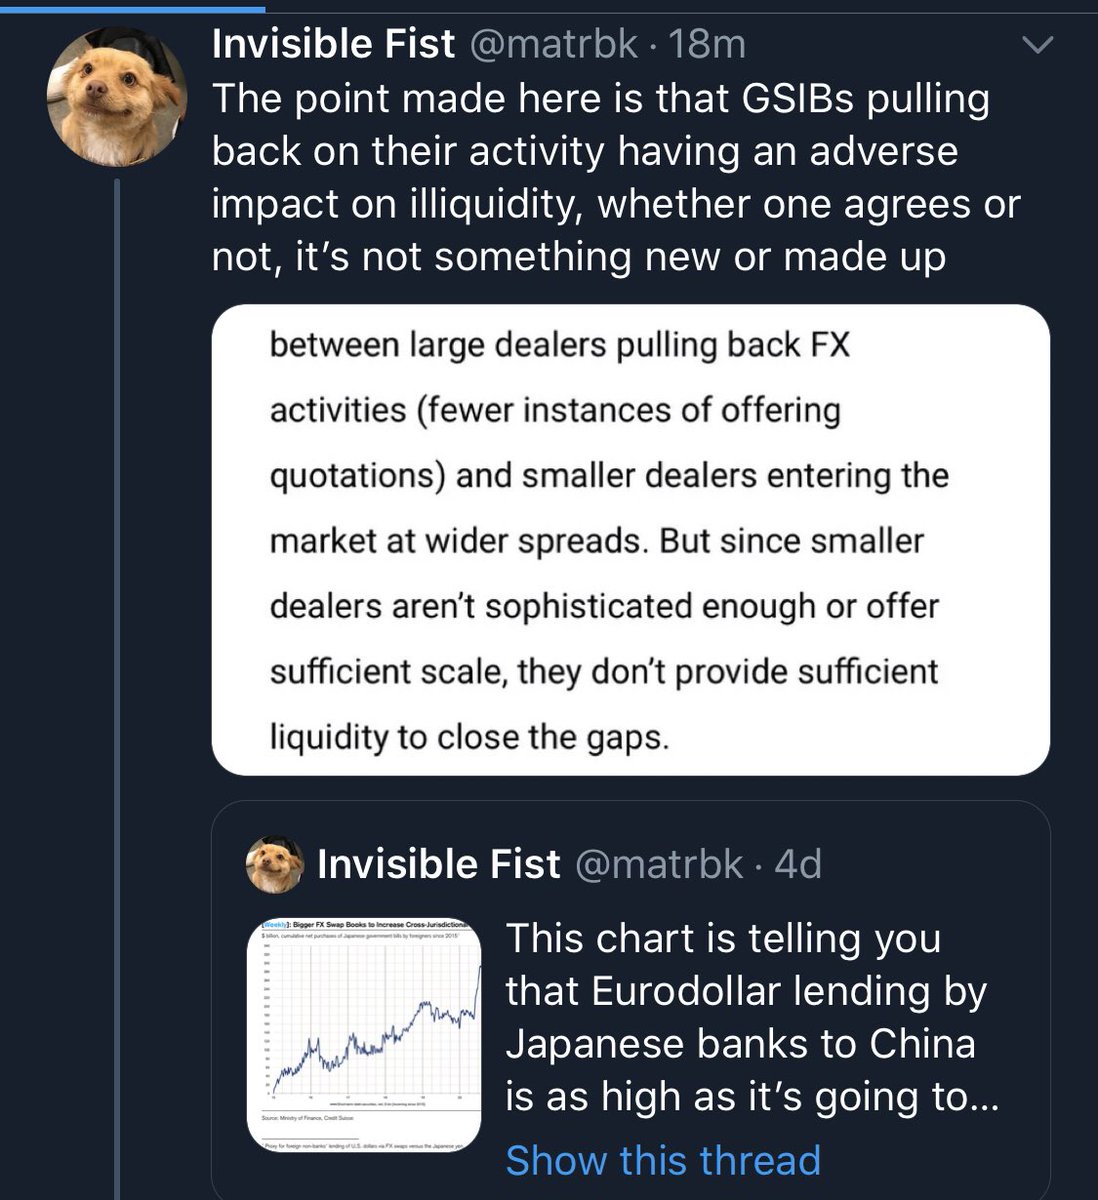 Yes GSIBs pulling back would affect liquidity. Translated: when banks lend less, there is less money lent. This is not new, or controversial. To anyone.